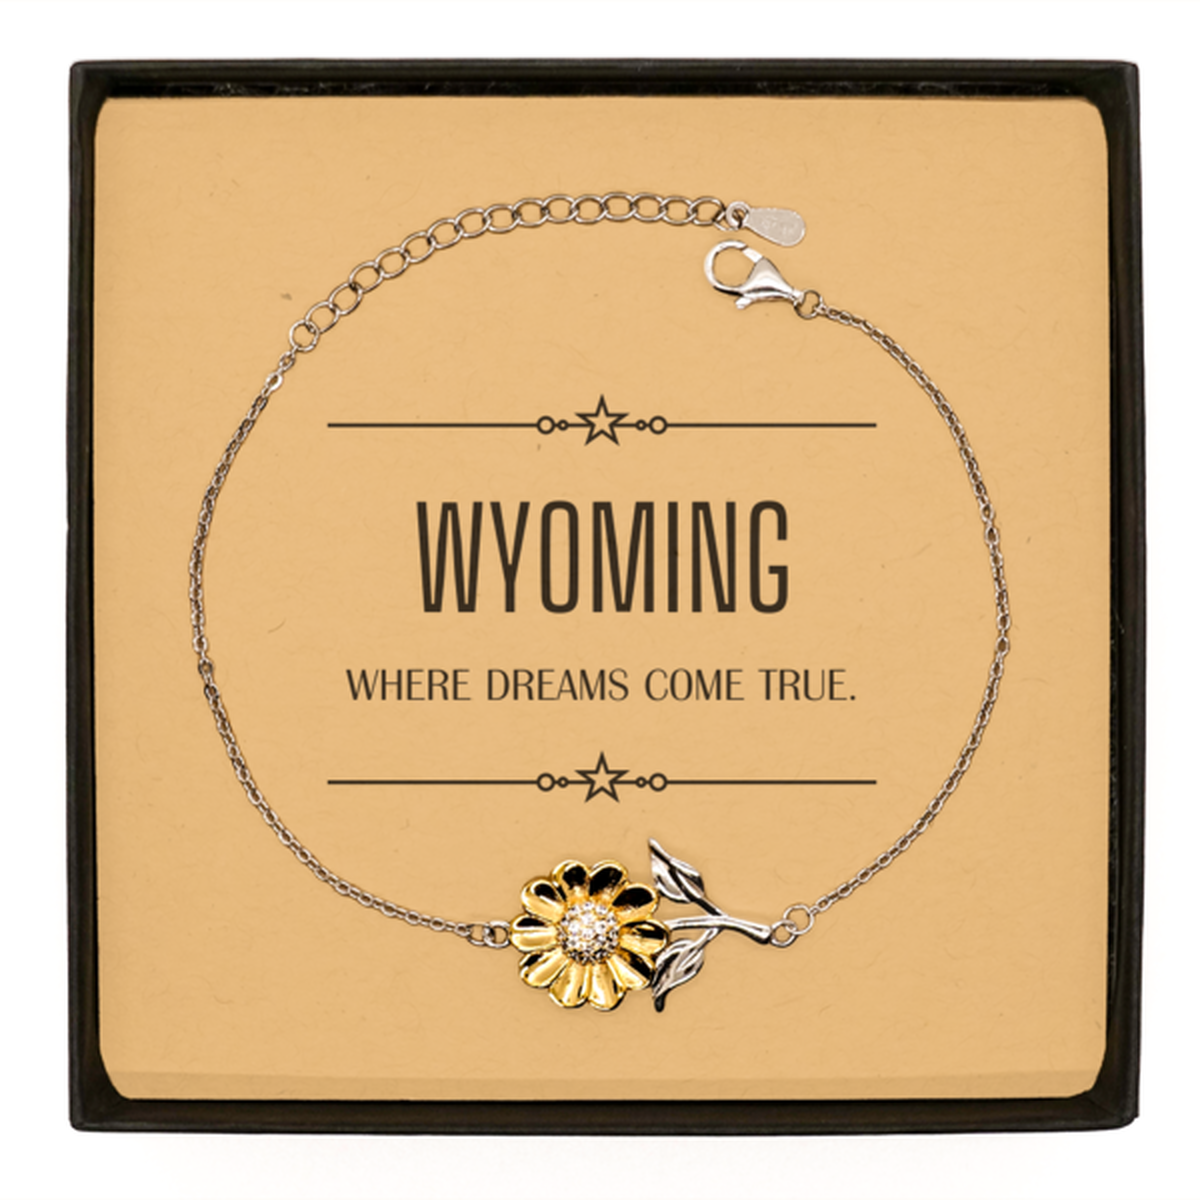 Love Wyoming State Sunflower Bracelet, Wyoming Where dreams come true, Birthday Inspirational Gifts For Wyoming Men, Women, Friends